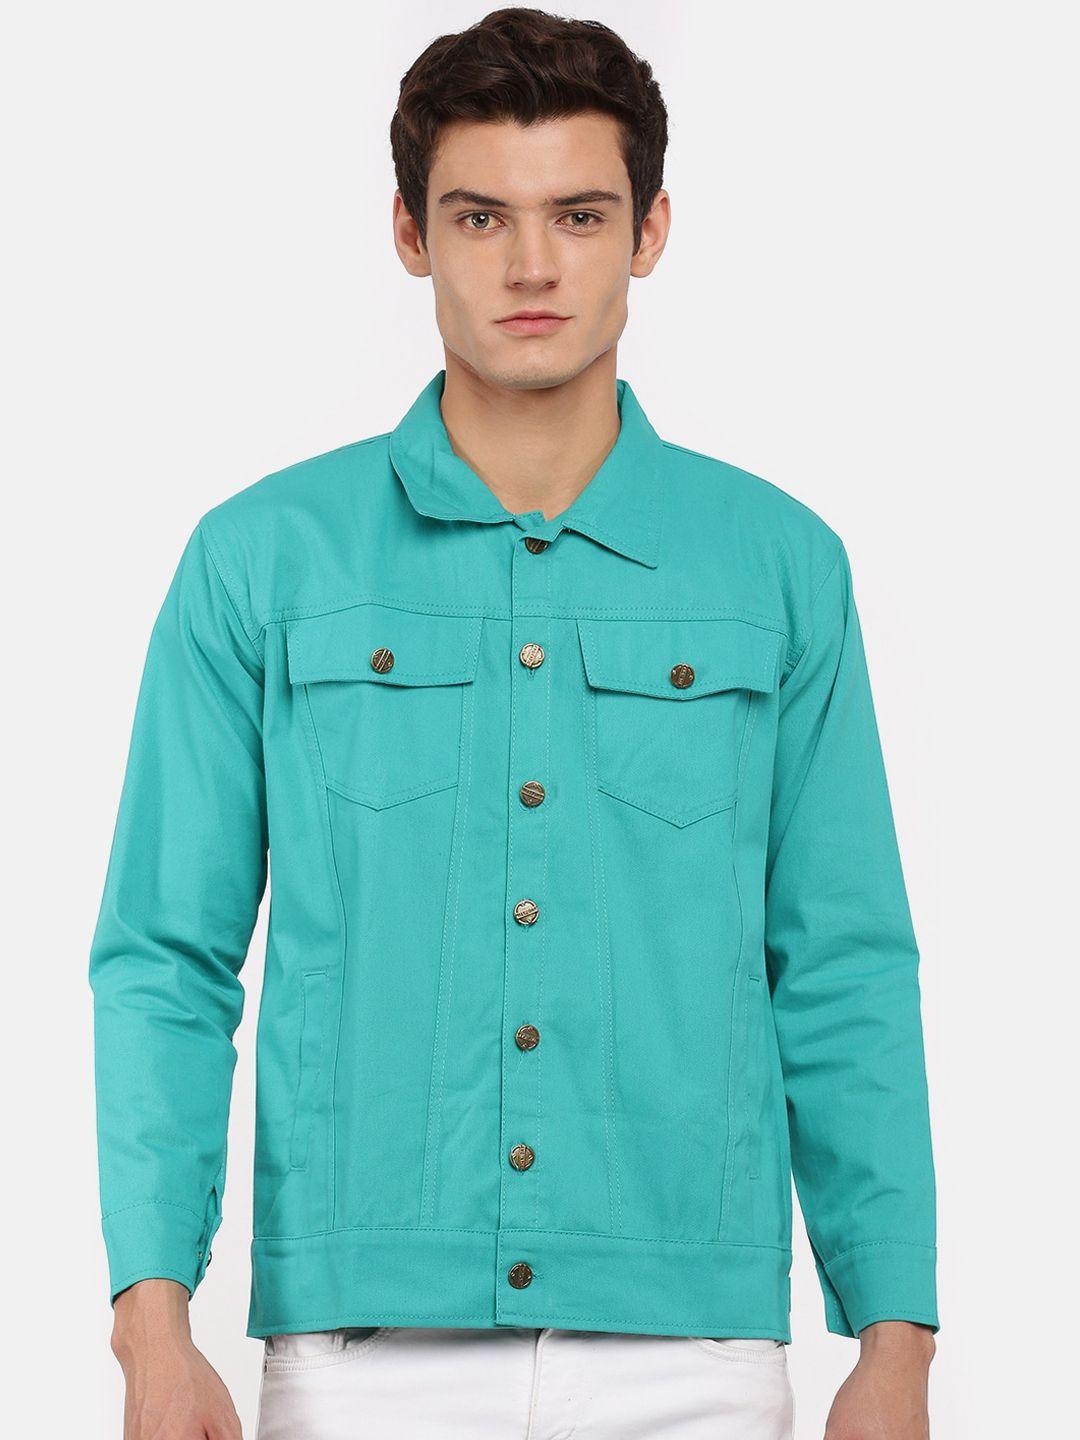 voxati men turquoise blue denim jacket with embroidered